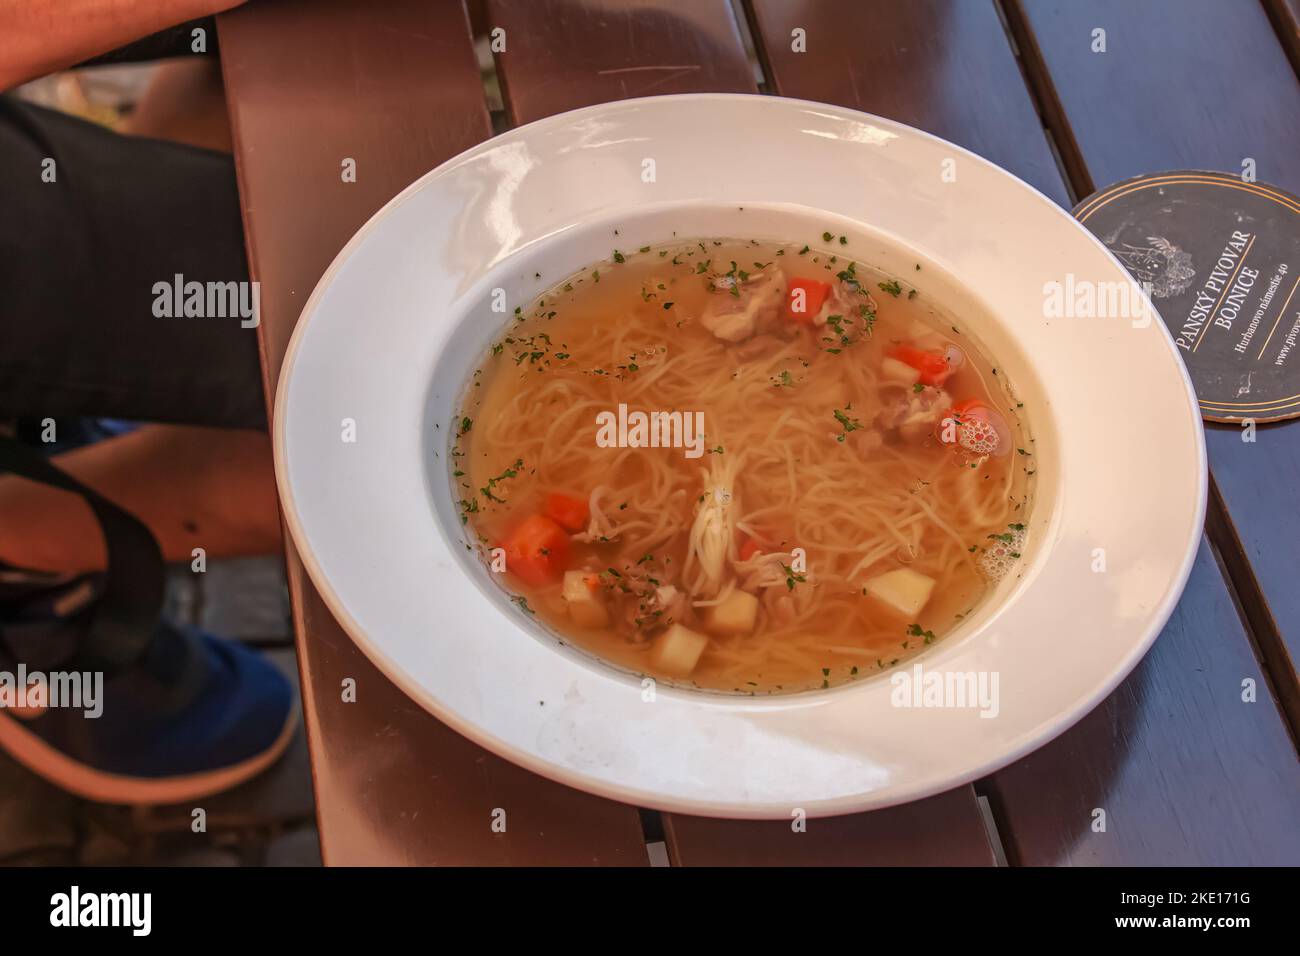 Bojnice, Slovakia - 06.11.2022: Soup with noodles and vegetables in a white plate on a wooden table. Stock Photo